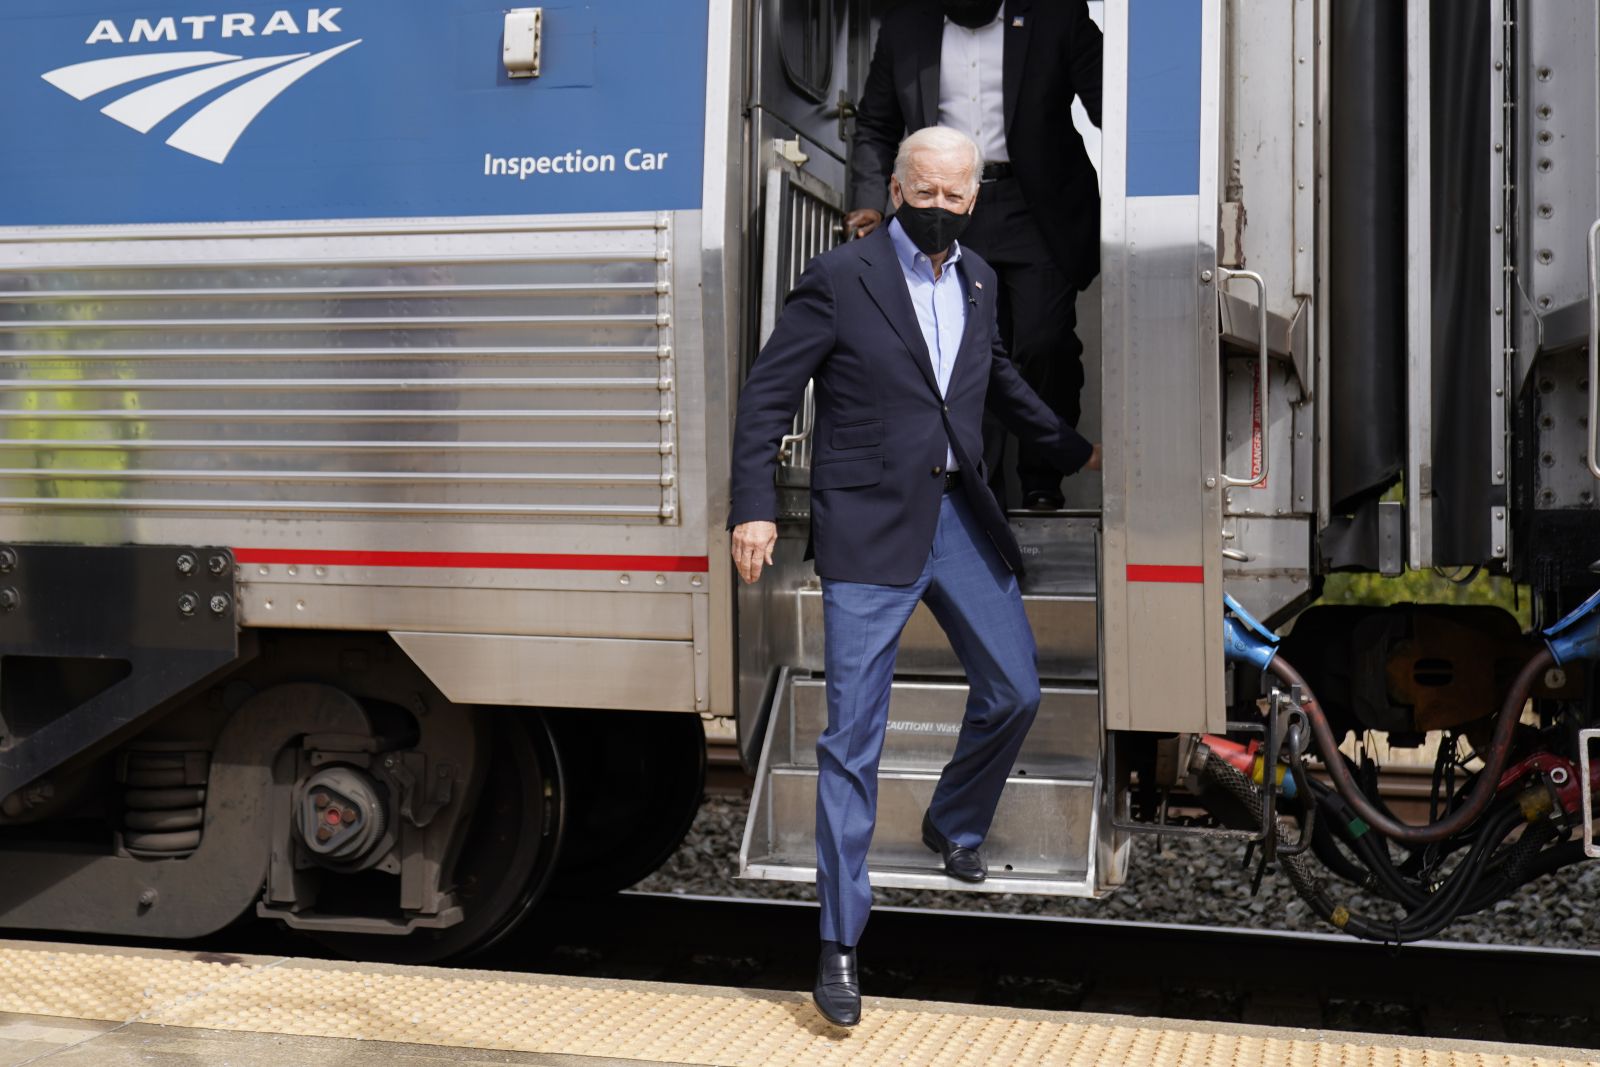 Campaigning in Pittsburgh last year: Biden is known to like trains and, as a senator, used to commute by rail for decades from Delaware to Washington for 36 years.